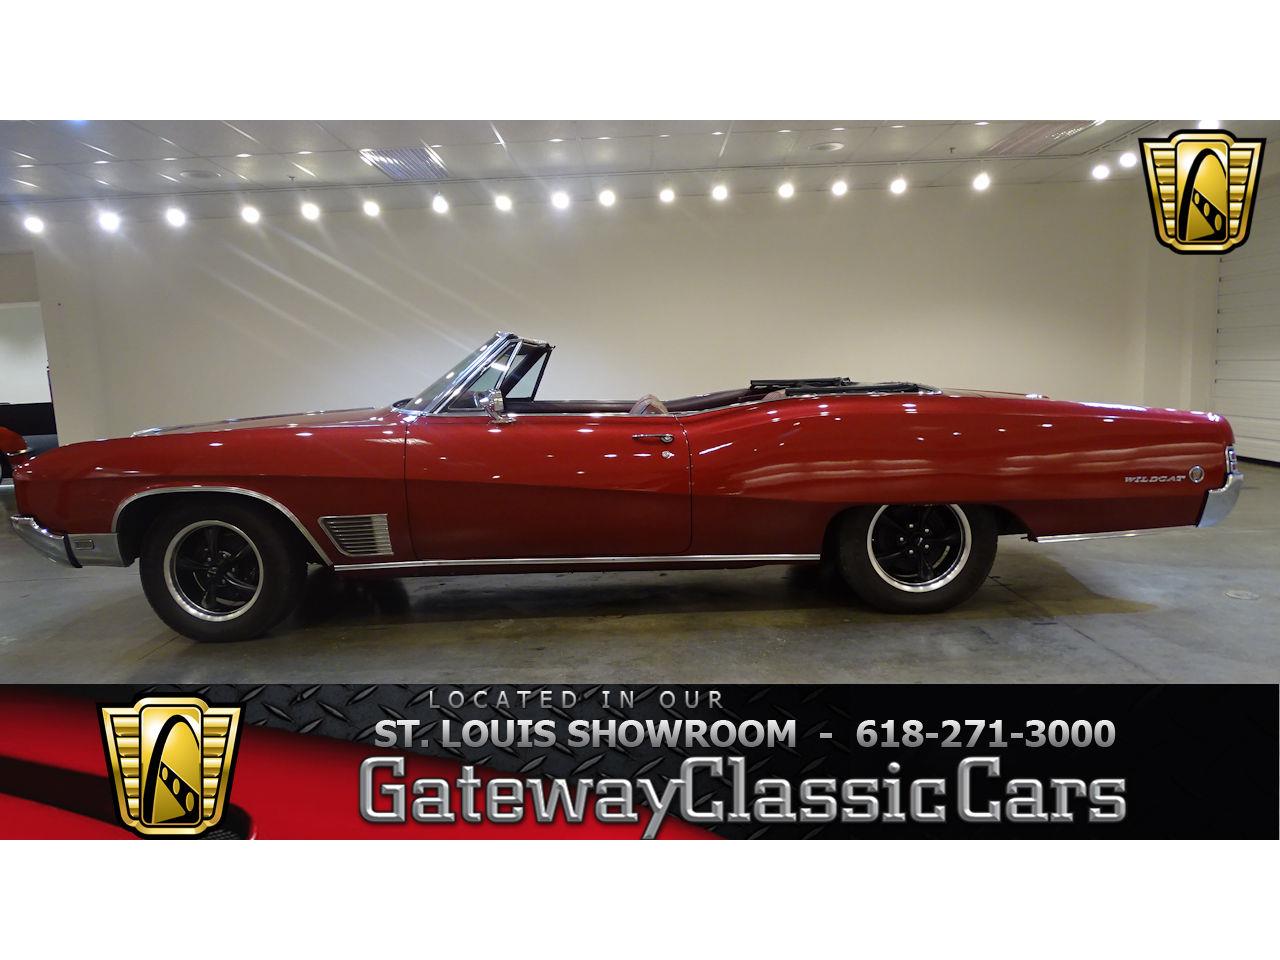 1968 buick wildcat for sale classiccars com cc 958853 1968 buick wildcat for sale